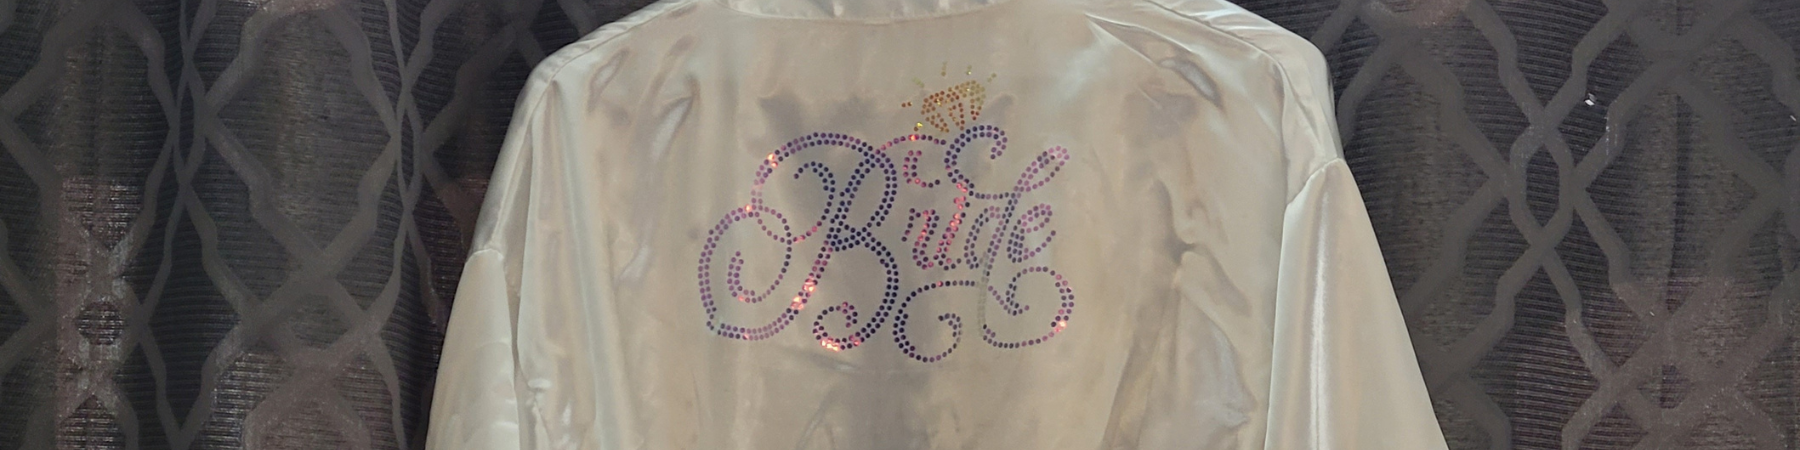 HOW TO MAKE RHINESTONE SHIRTS FOR BEGINNERS WITH THE CRICUT MAKER 